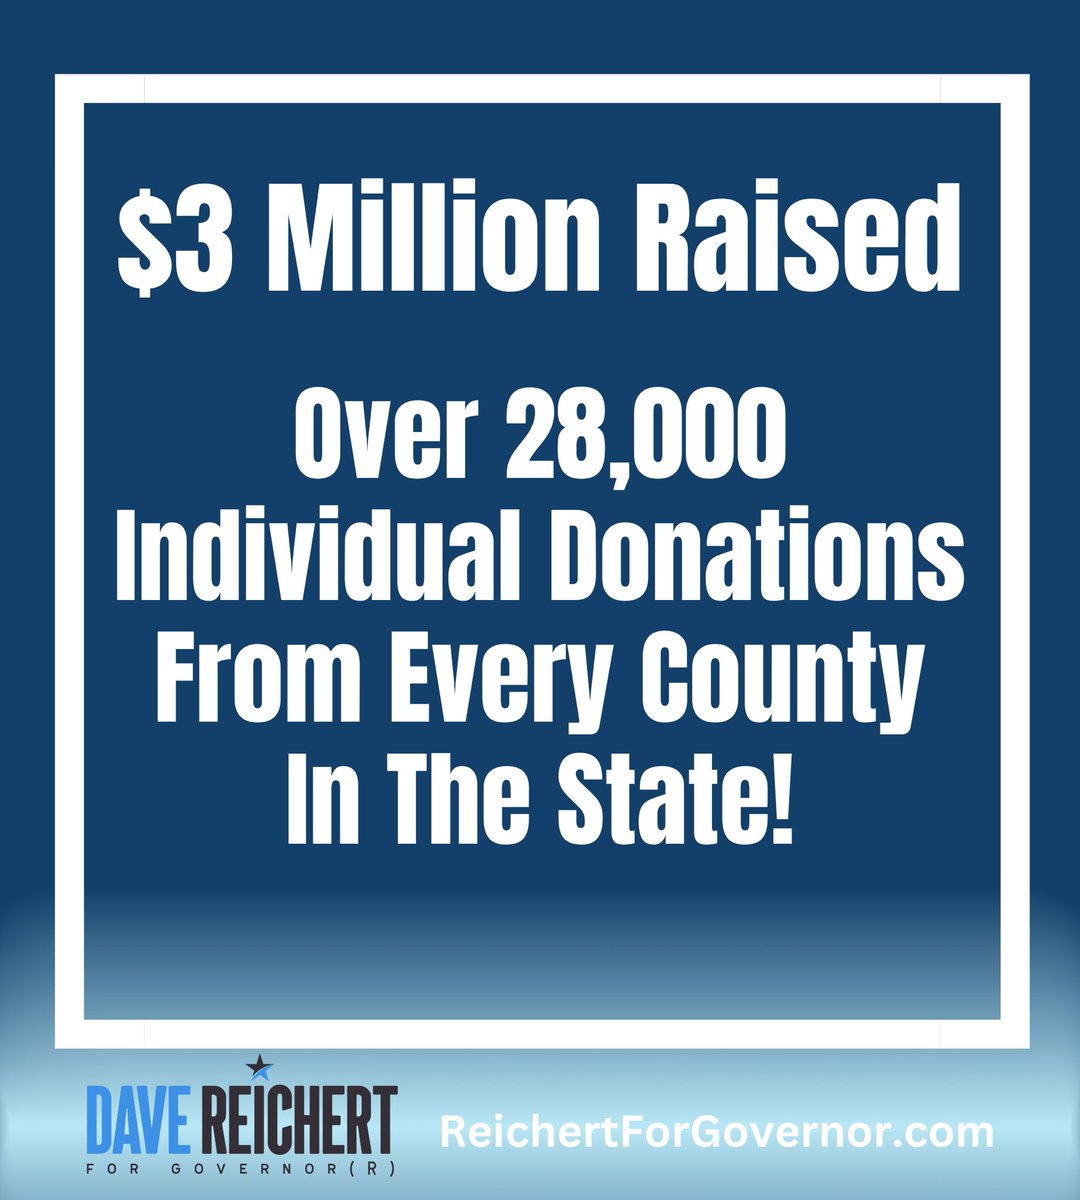 The momentum of our campaign continues to grow daily as we look towards November! We’ve had over 28,000 individual donations and have raised $3 million with small dollar donor support across the state! Everyone agrees Dave Reichert is our best chance of winning in decades!